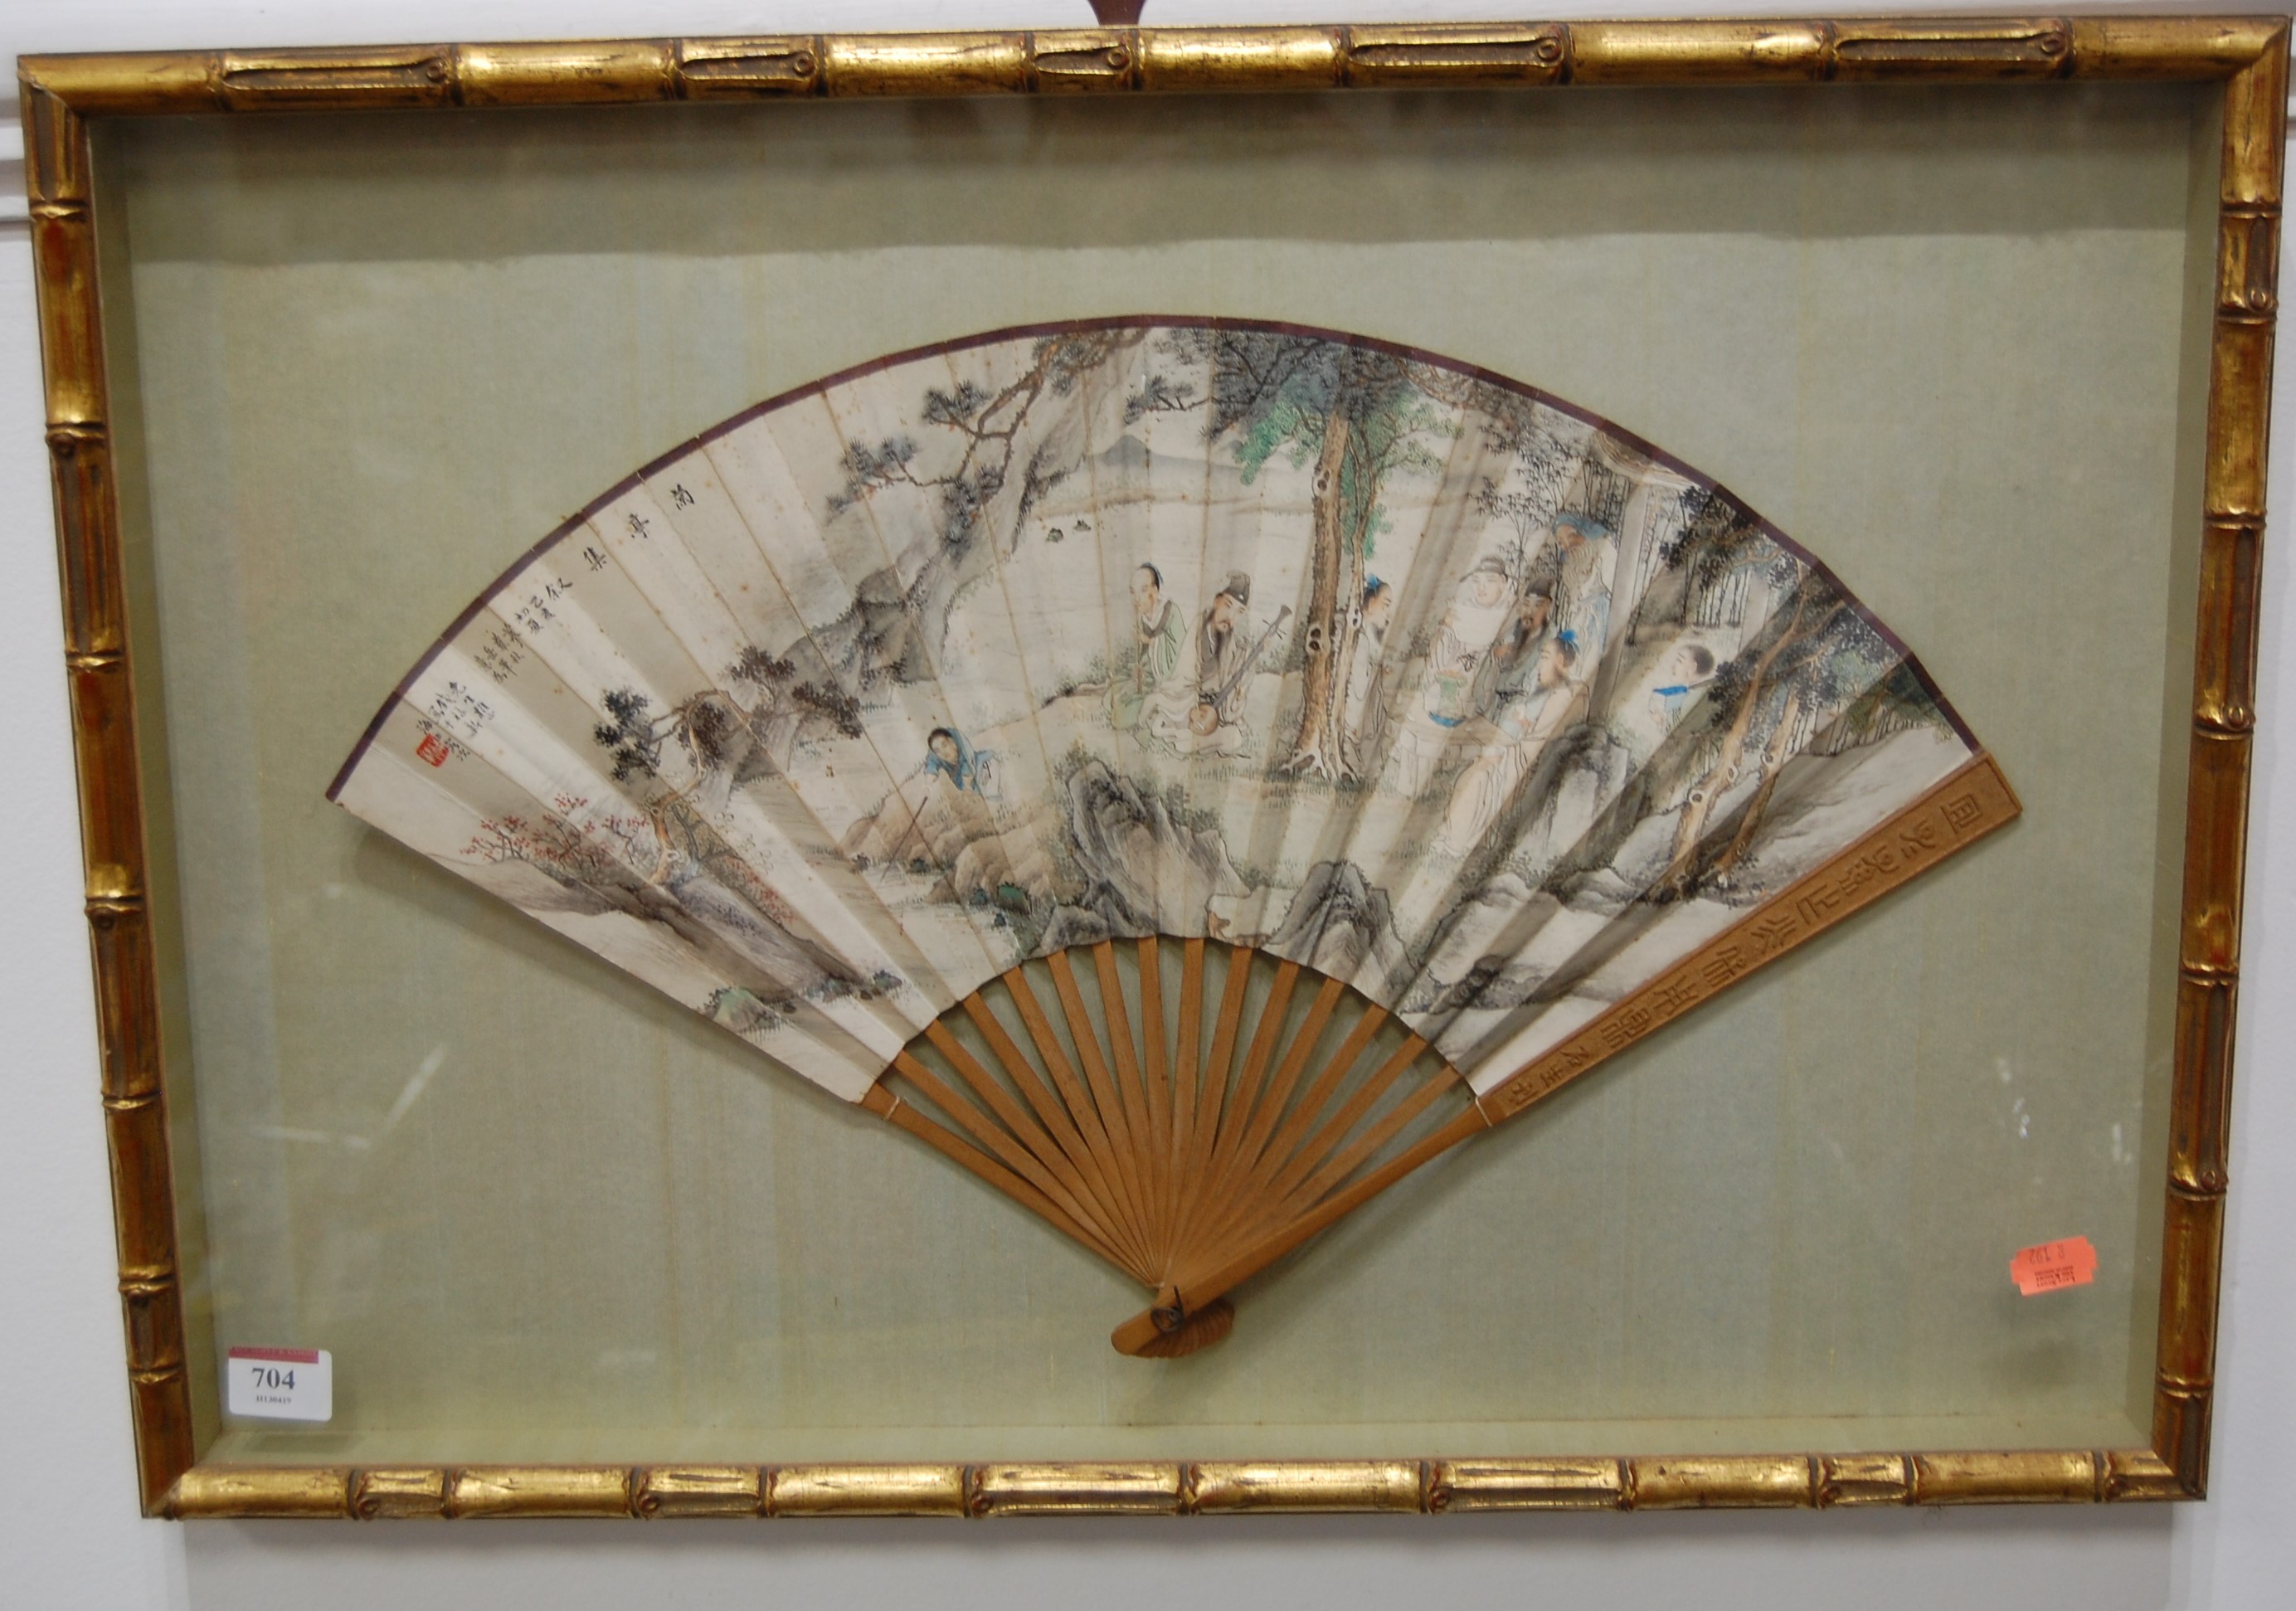 A mid-20th century hand-decorated Japanese fan, having Japanese script and depicting a dining/